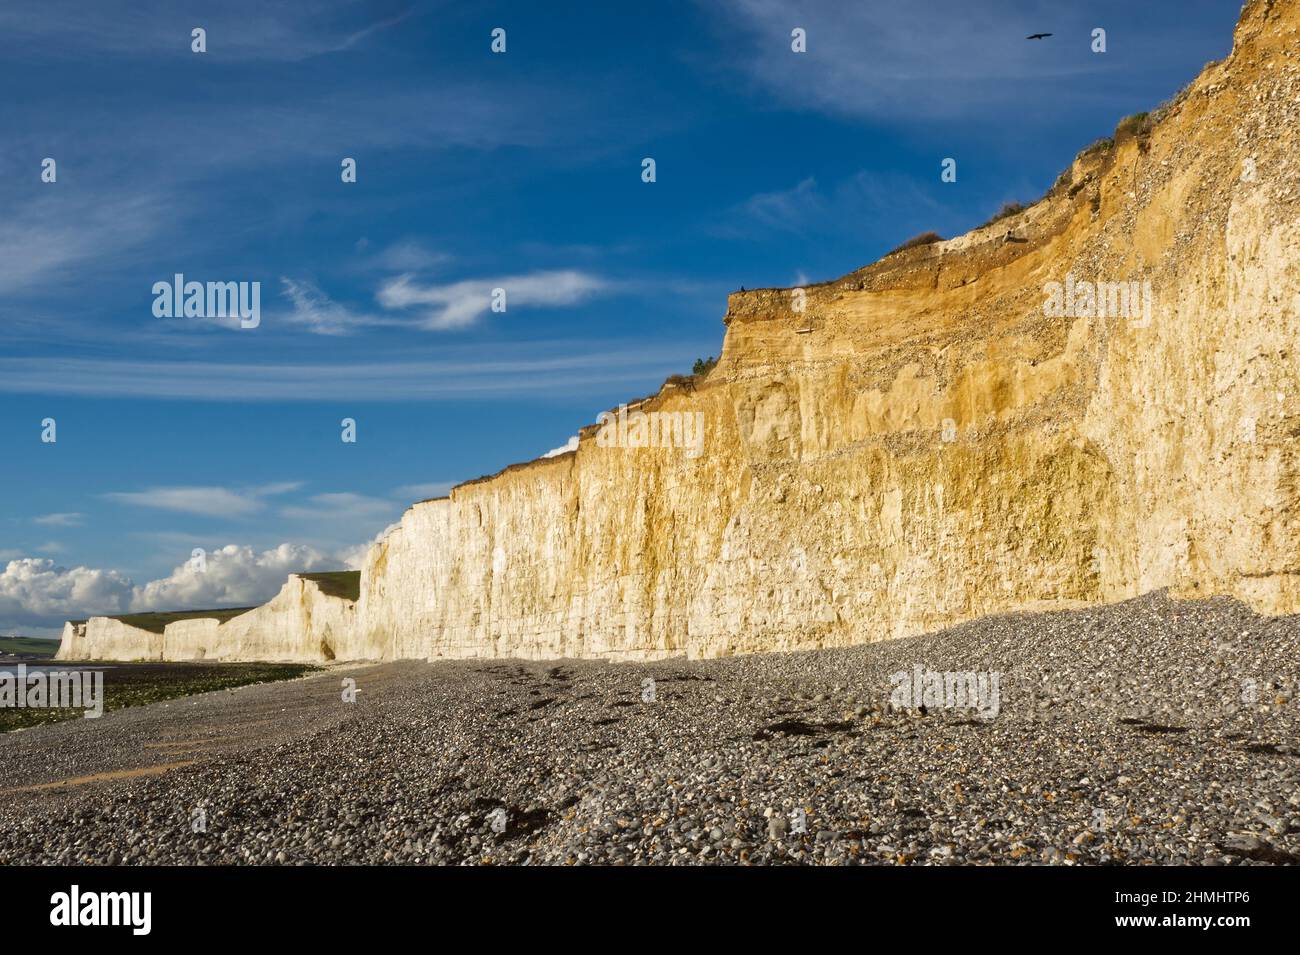 The Seven Sisters Chalk cliffs at Birling Gap near Eastbourne in East Sussex, England, with shingle beach. Stock Photo